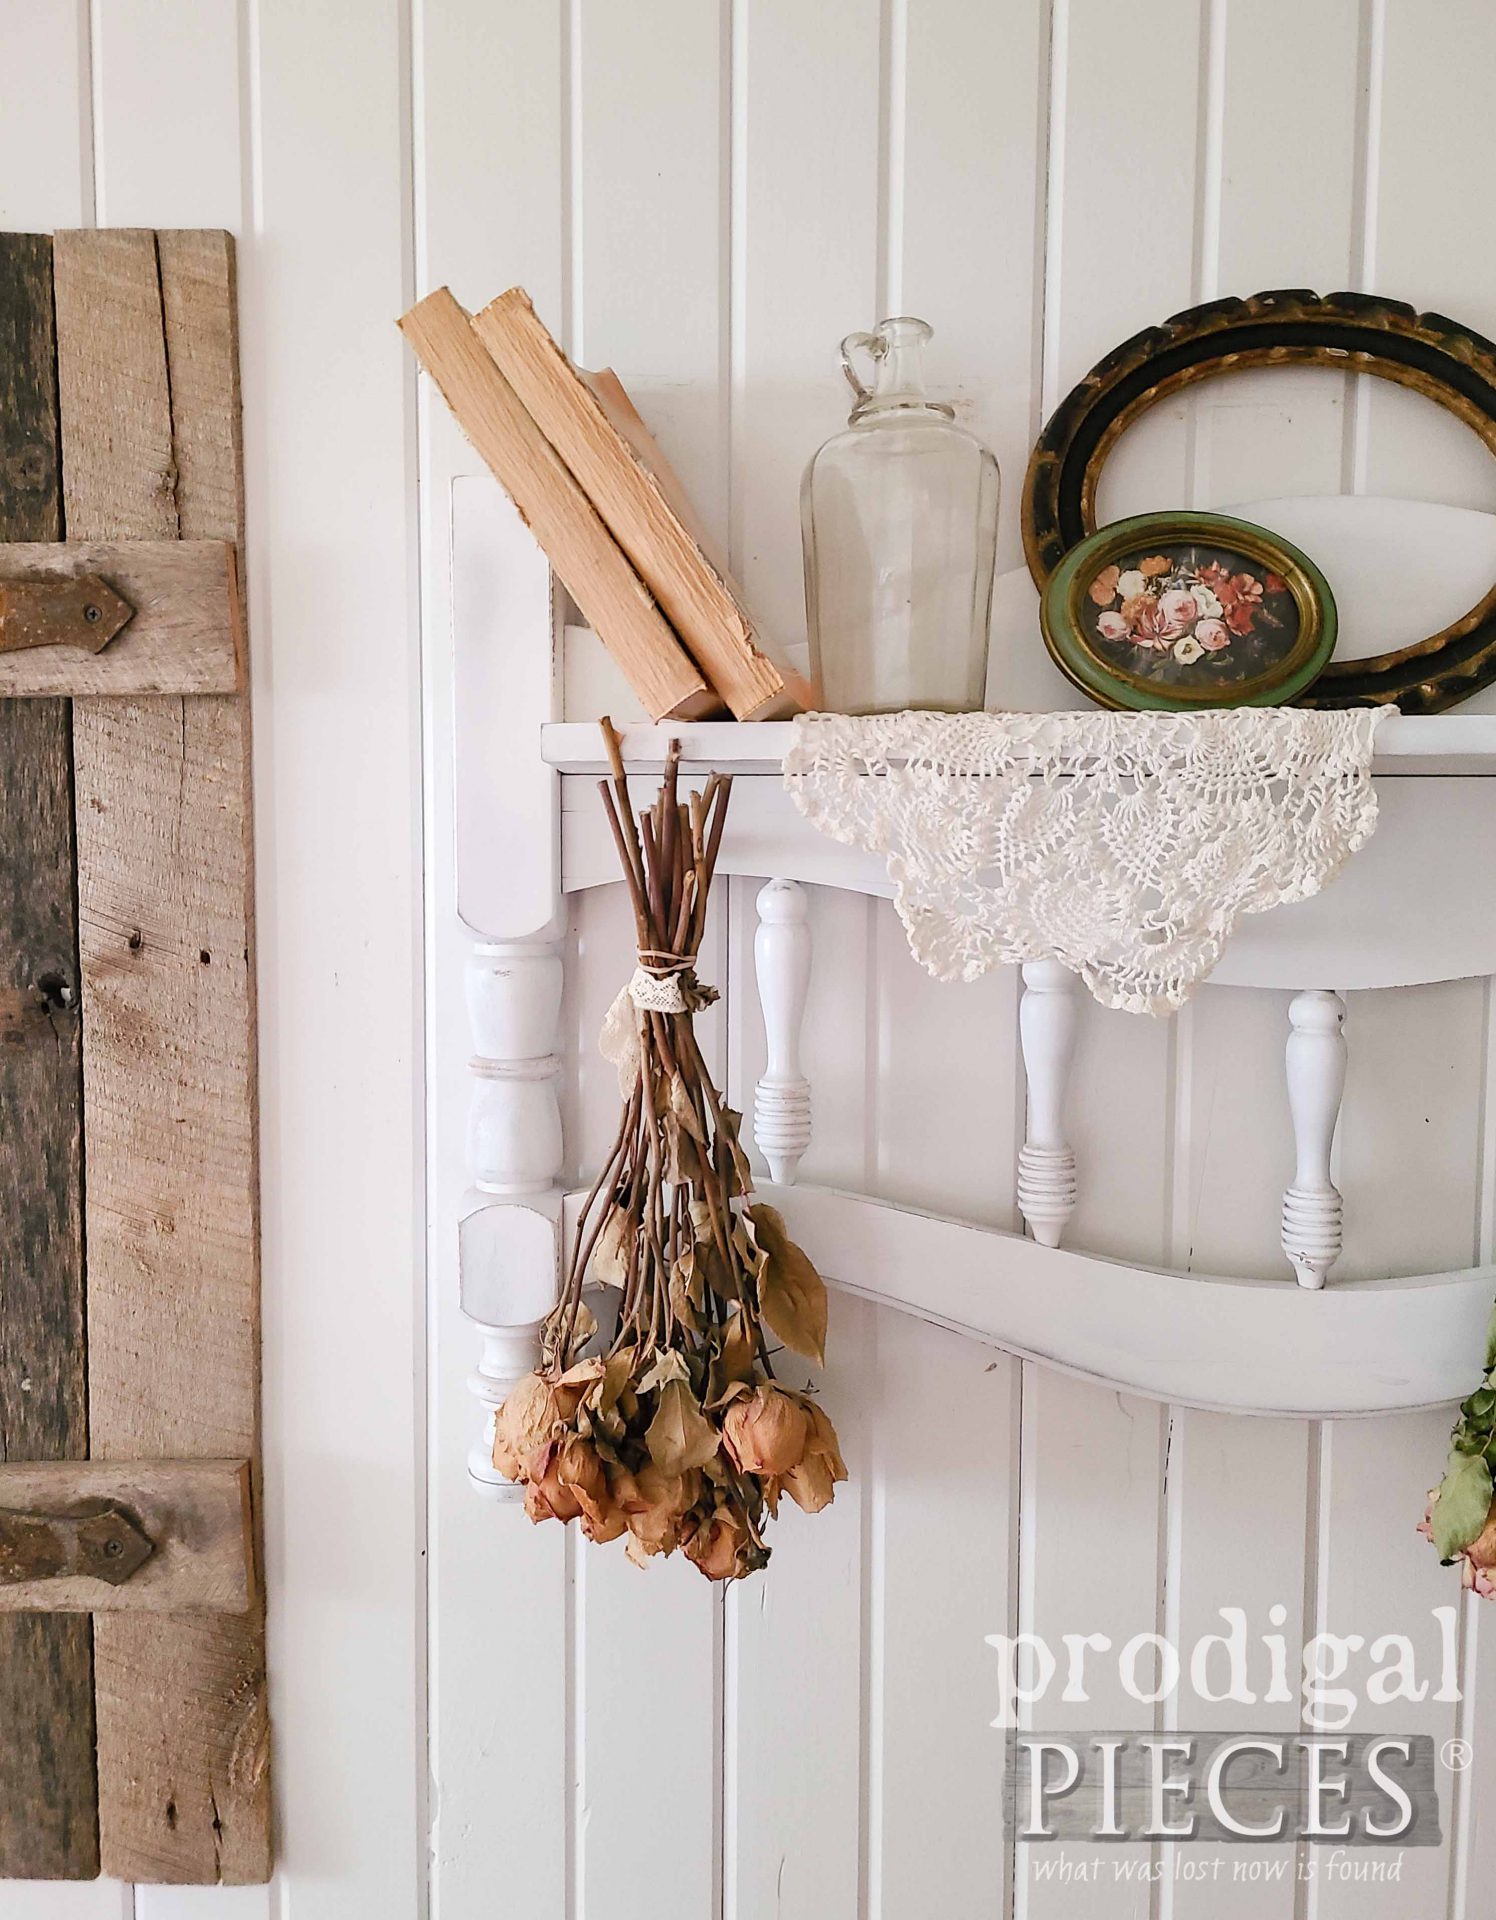 Cottage Style Vignette with Roses on Upcycled Headboard Coat Rack by Larissa of Prodigal Pieces | prodigalpieces.com #prodigalpieces #cottage #farmhouse #diy #upcycled